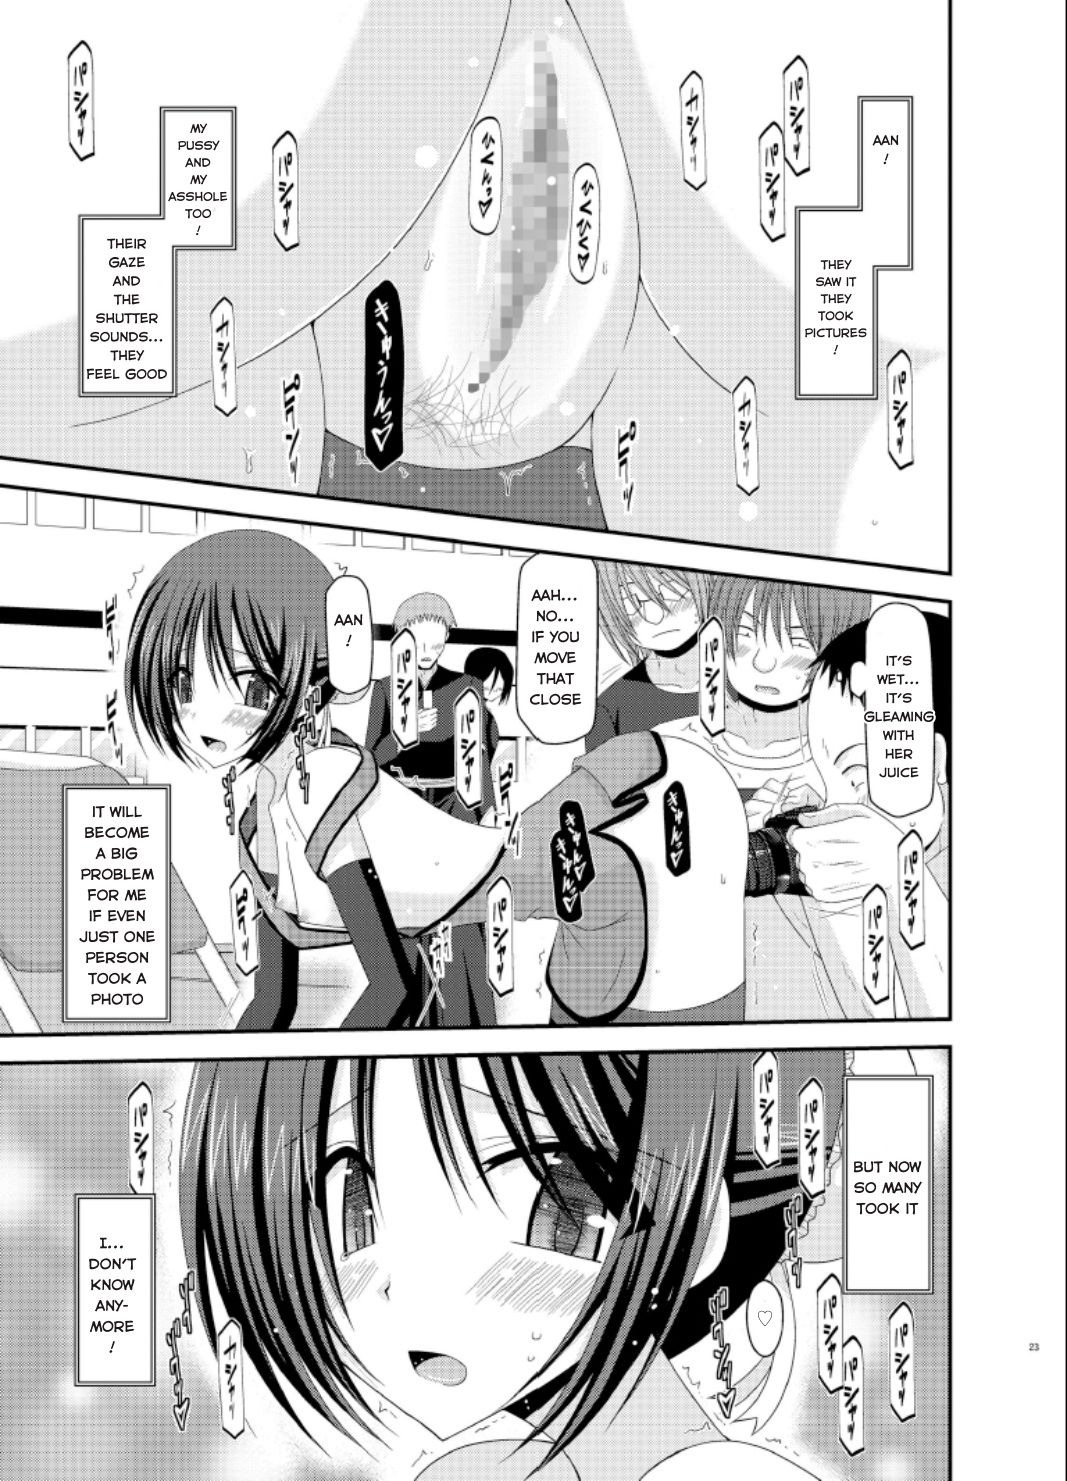 [valssu] Exhibitionist Girl_s Play Extra Chapter cosplay part [hong_mei_ling] [Tomoya] page 20 full